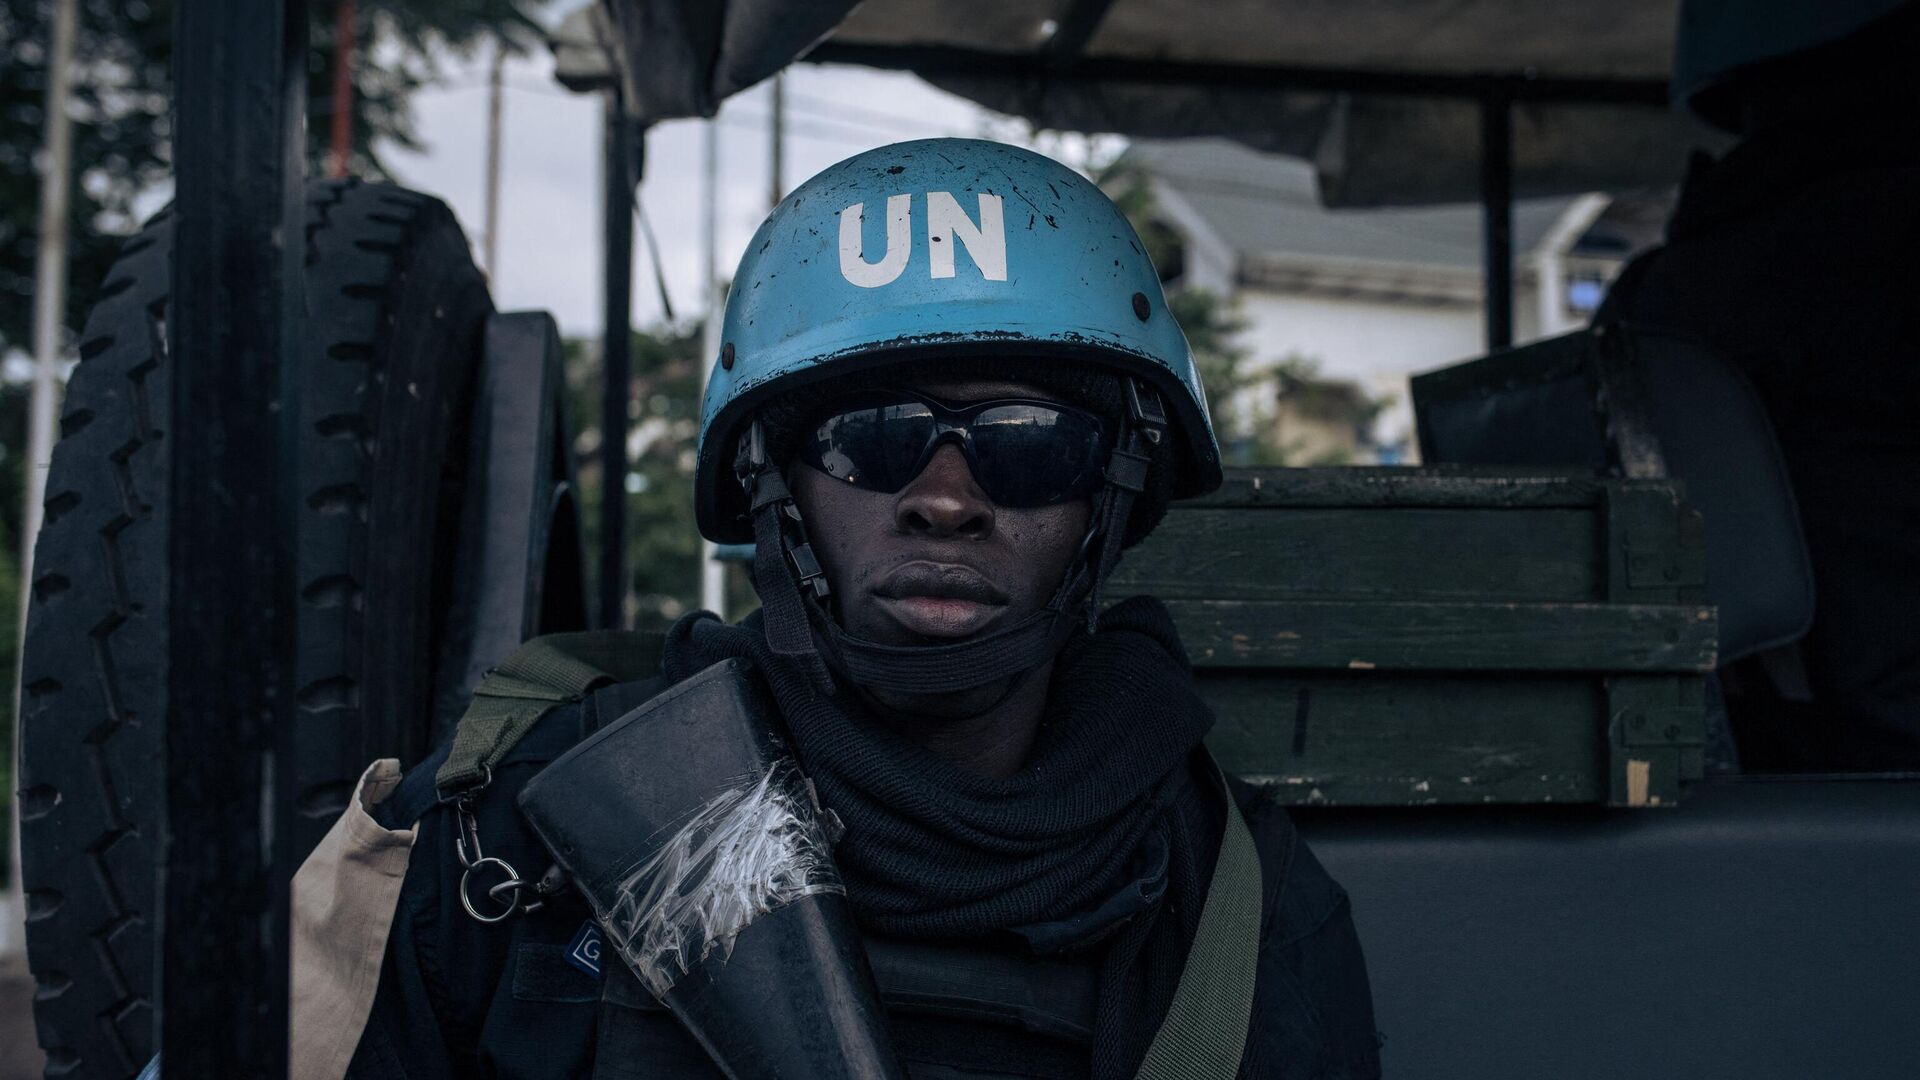 A Senegalese peacekeepers serving with the United Nations Organization Stabilization Mission in the Democratic Republic of the Congo (MONUSCO) poses for a photograph during patrol in Goma, on November 9, 2022. - Since October 20, fighting has resumed between the Congolese army and the M23 (March 23 Movement), allegedly backed by the Rwandan Army. - Sputnik International, 1920, 08.04.2023